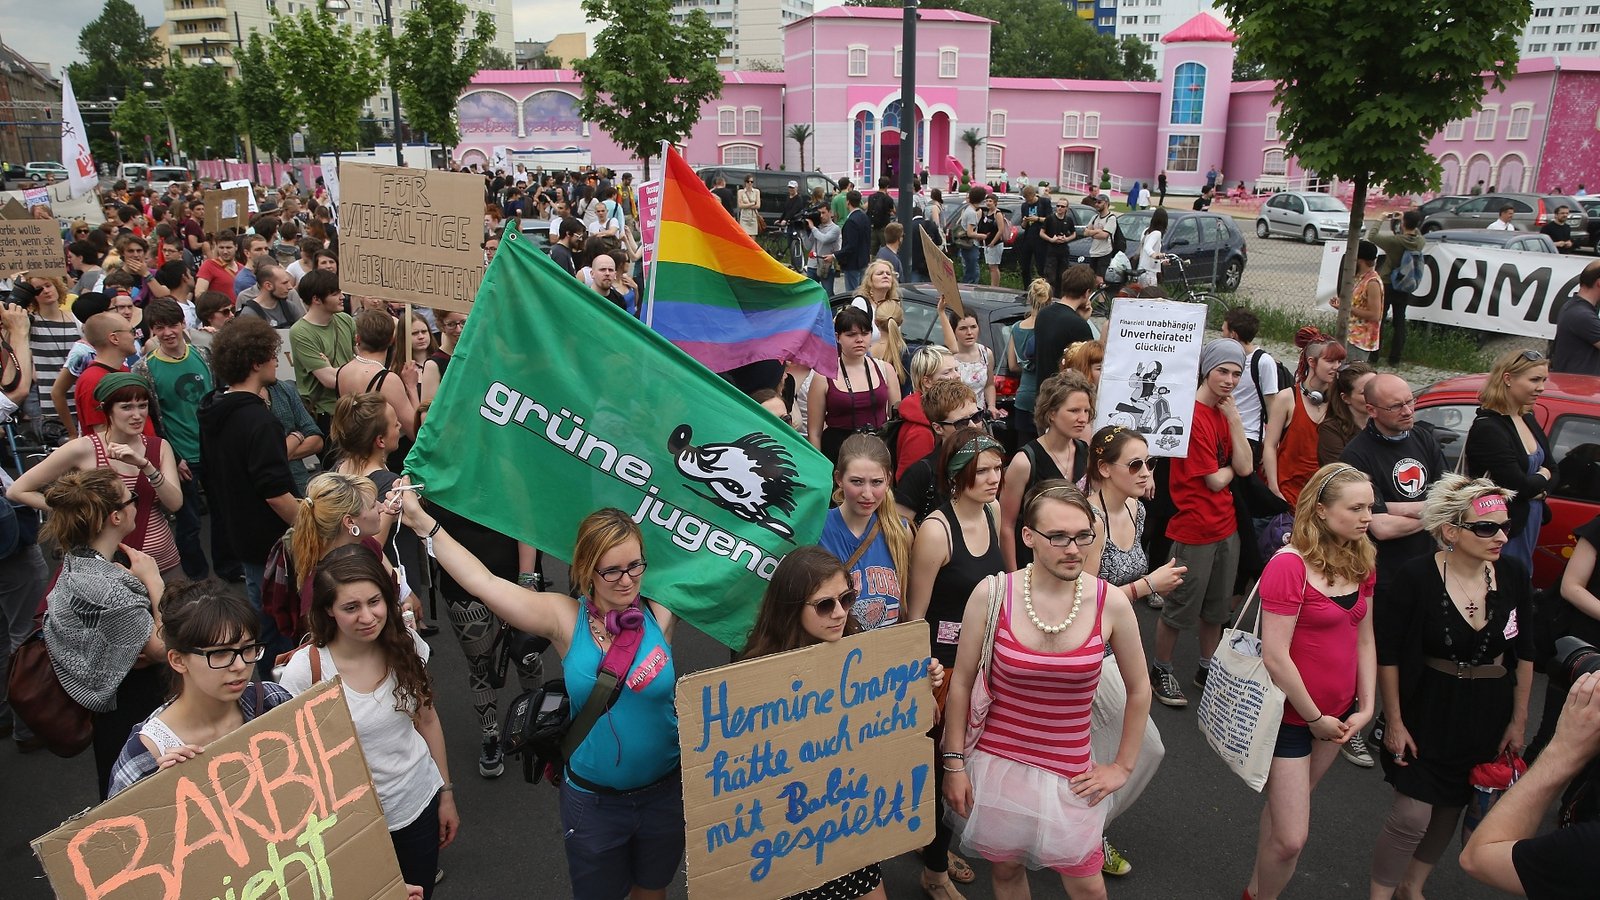 Protests in Berlin over Barbie Dreamhouse event